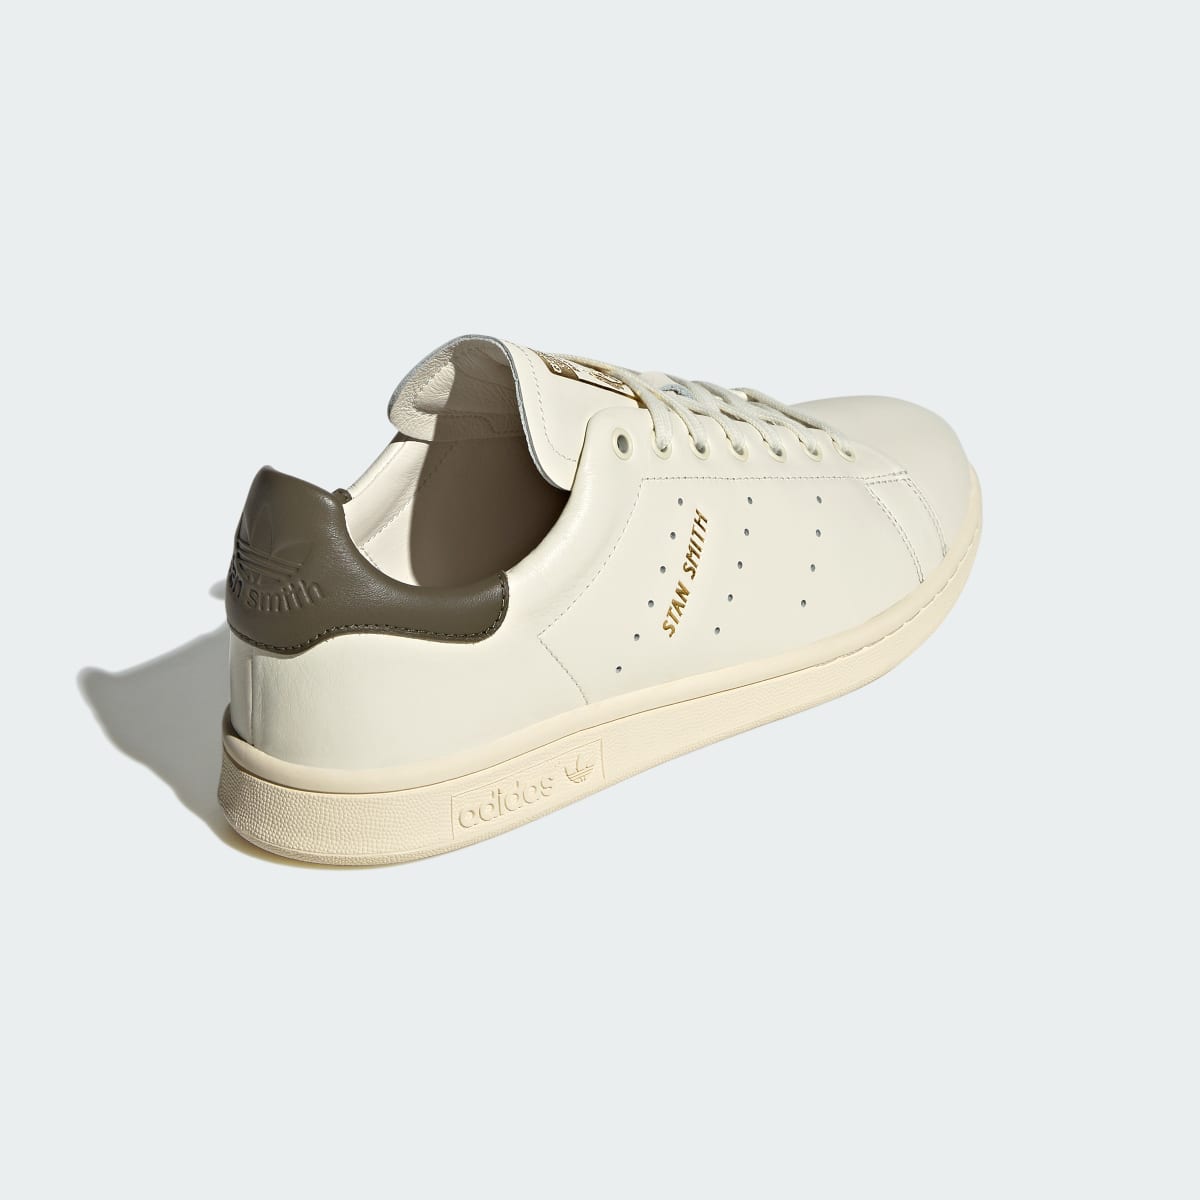 Adidas Stan Smith Lux Shoes. 6